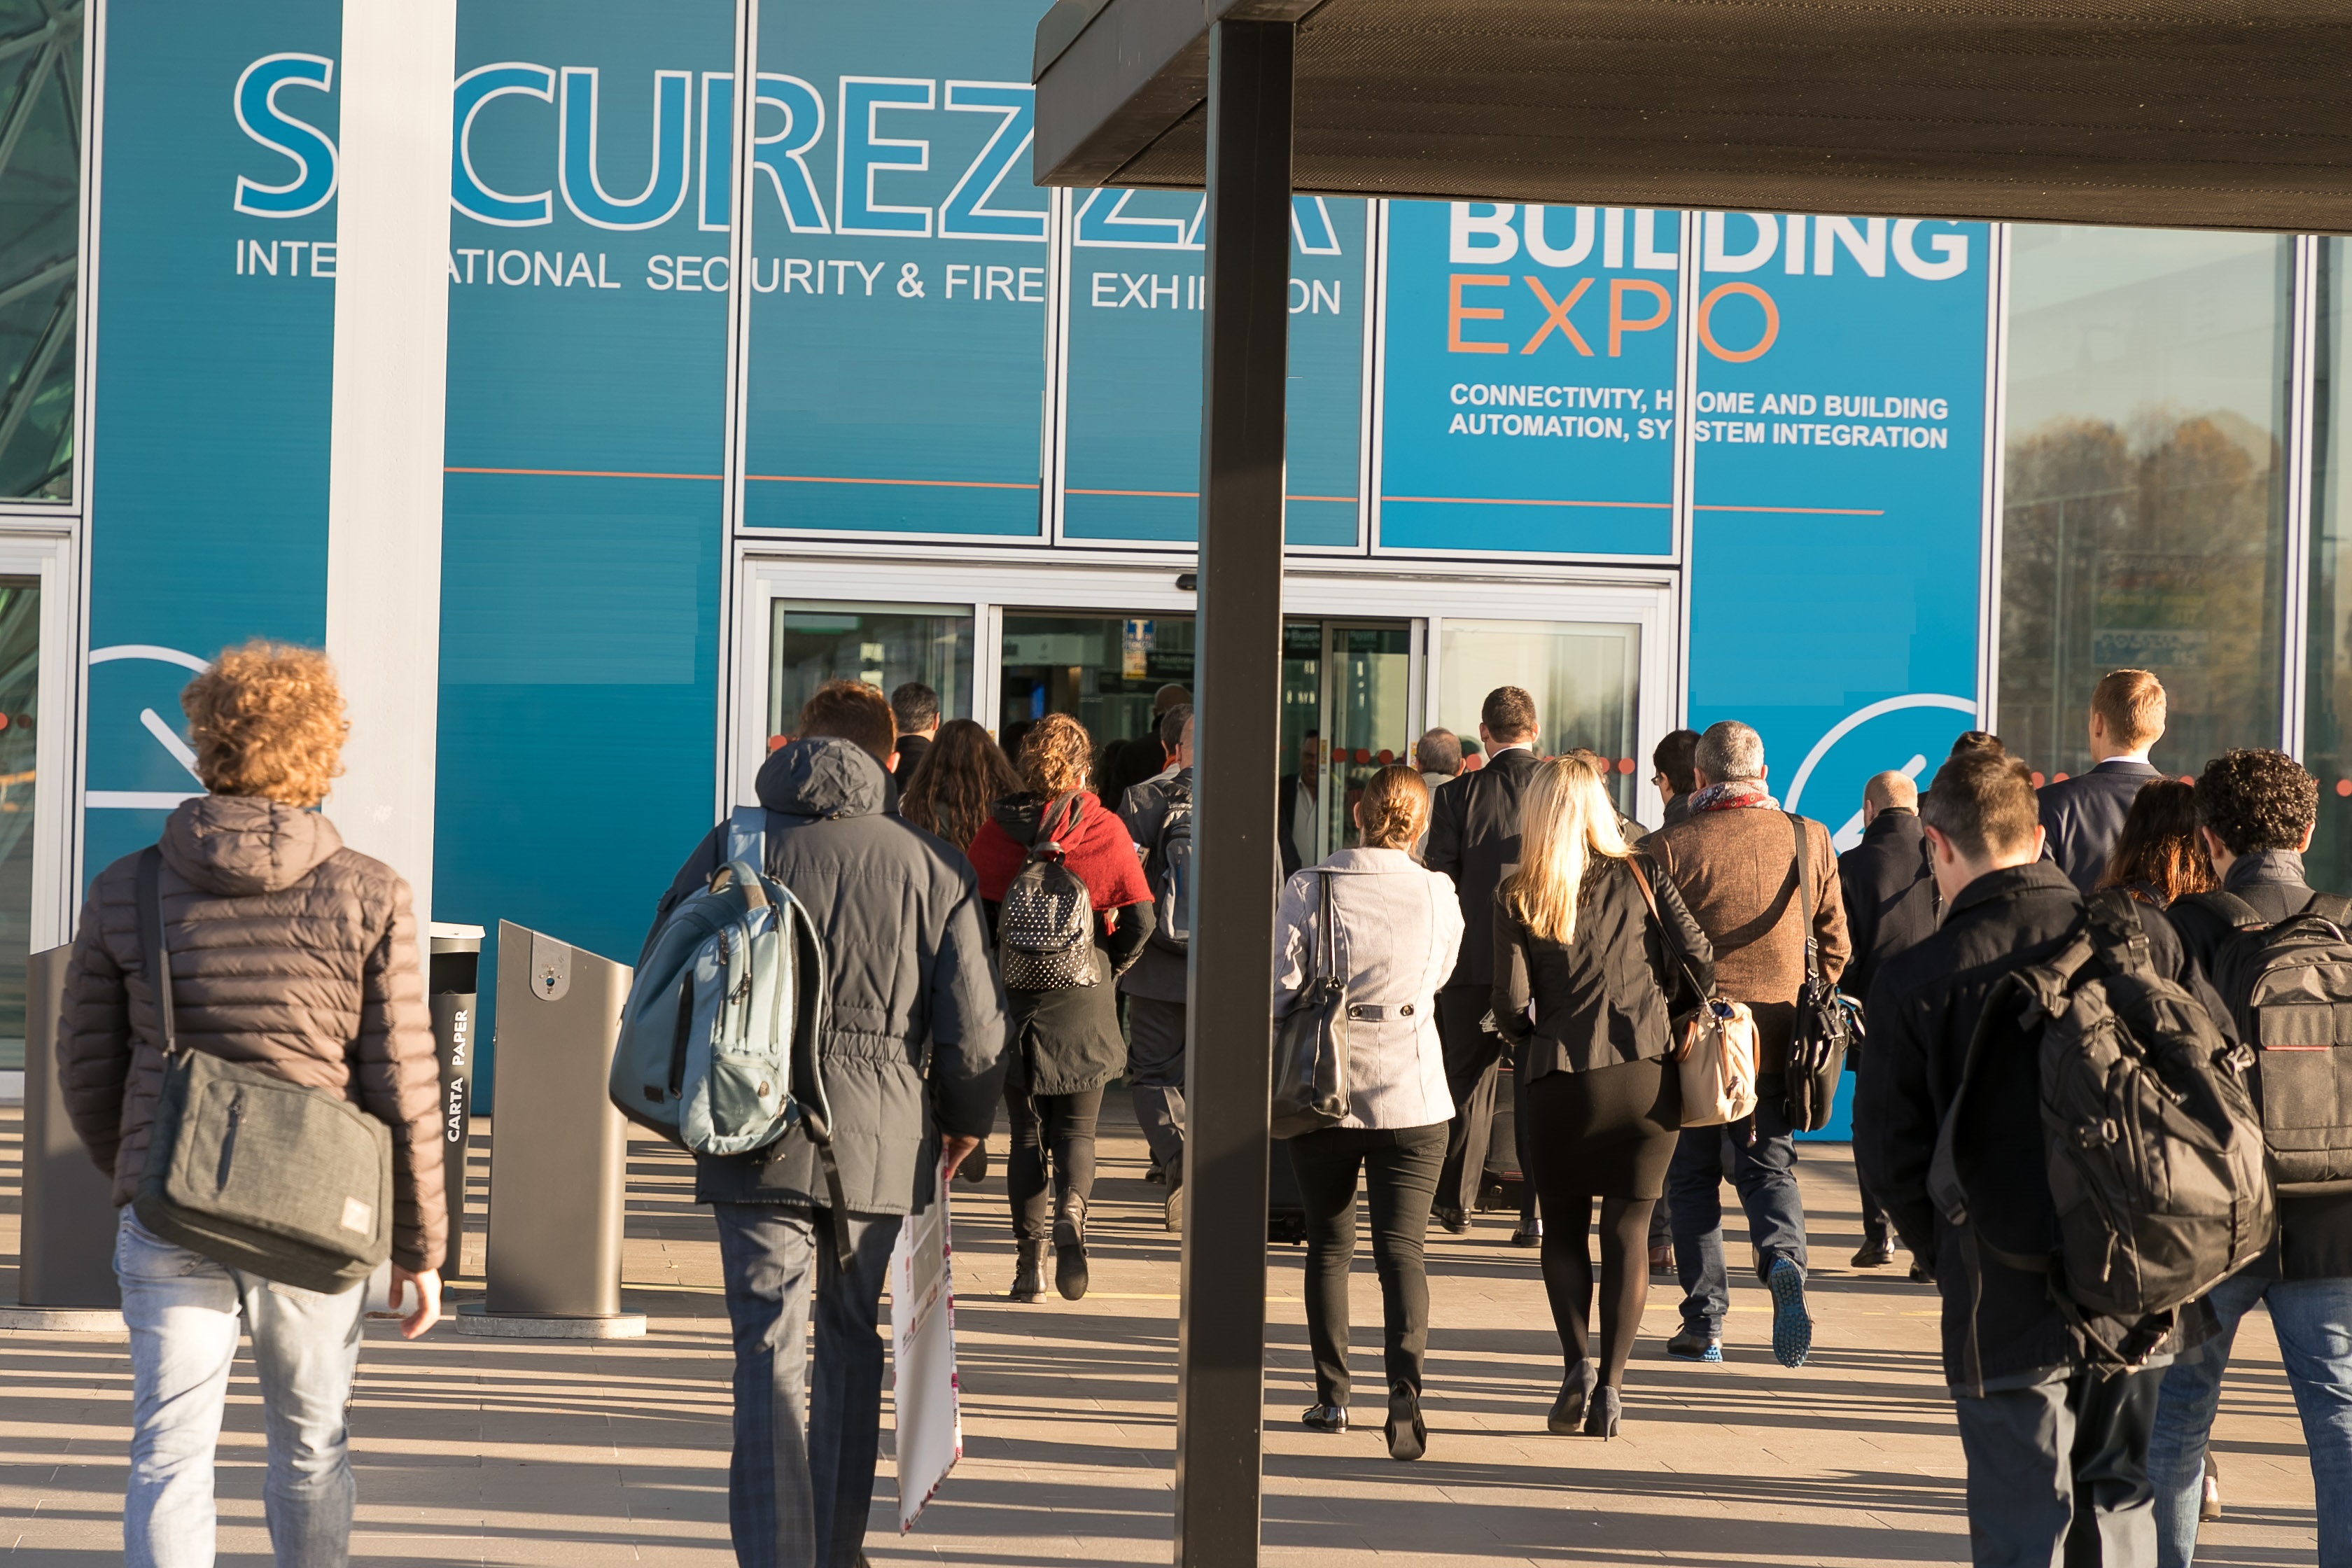 MADE Expo, SICUREZZA and SMART BUILDING EXPO together at Fiera Milano